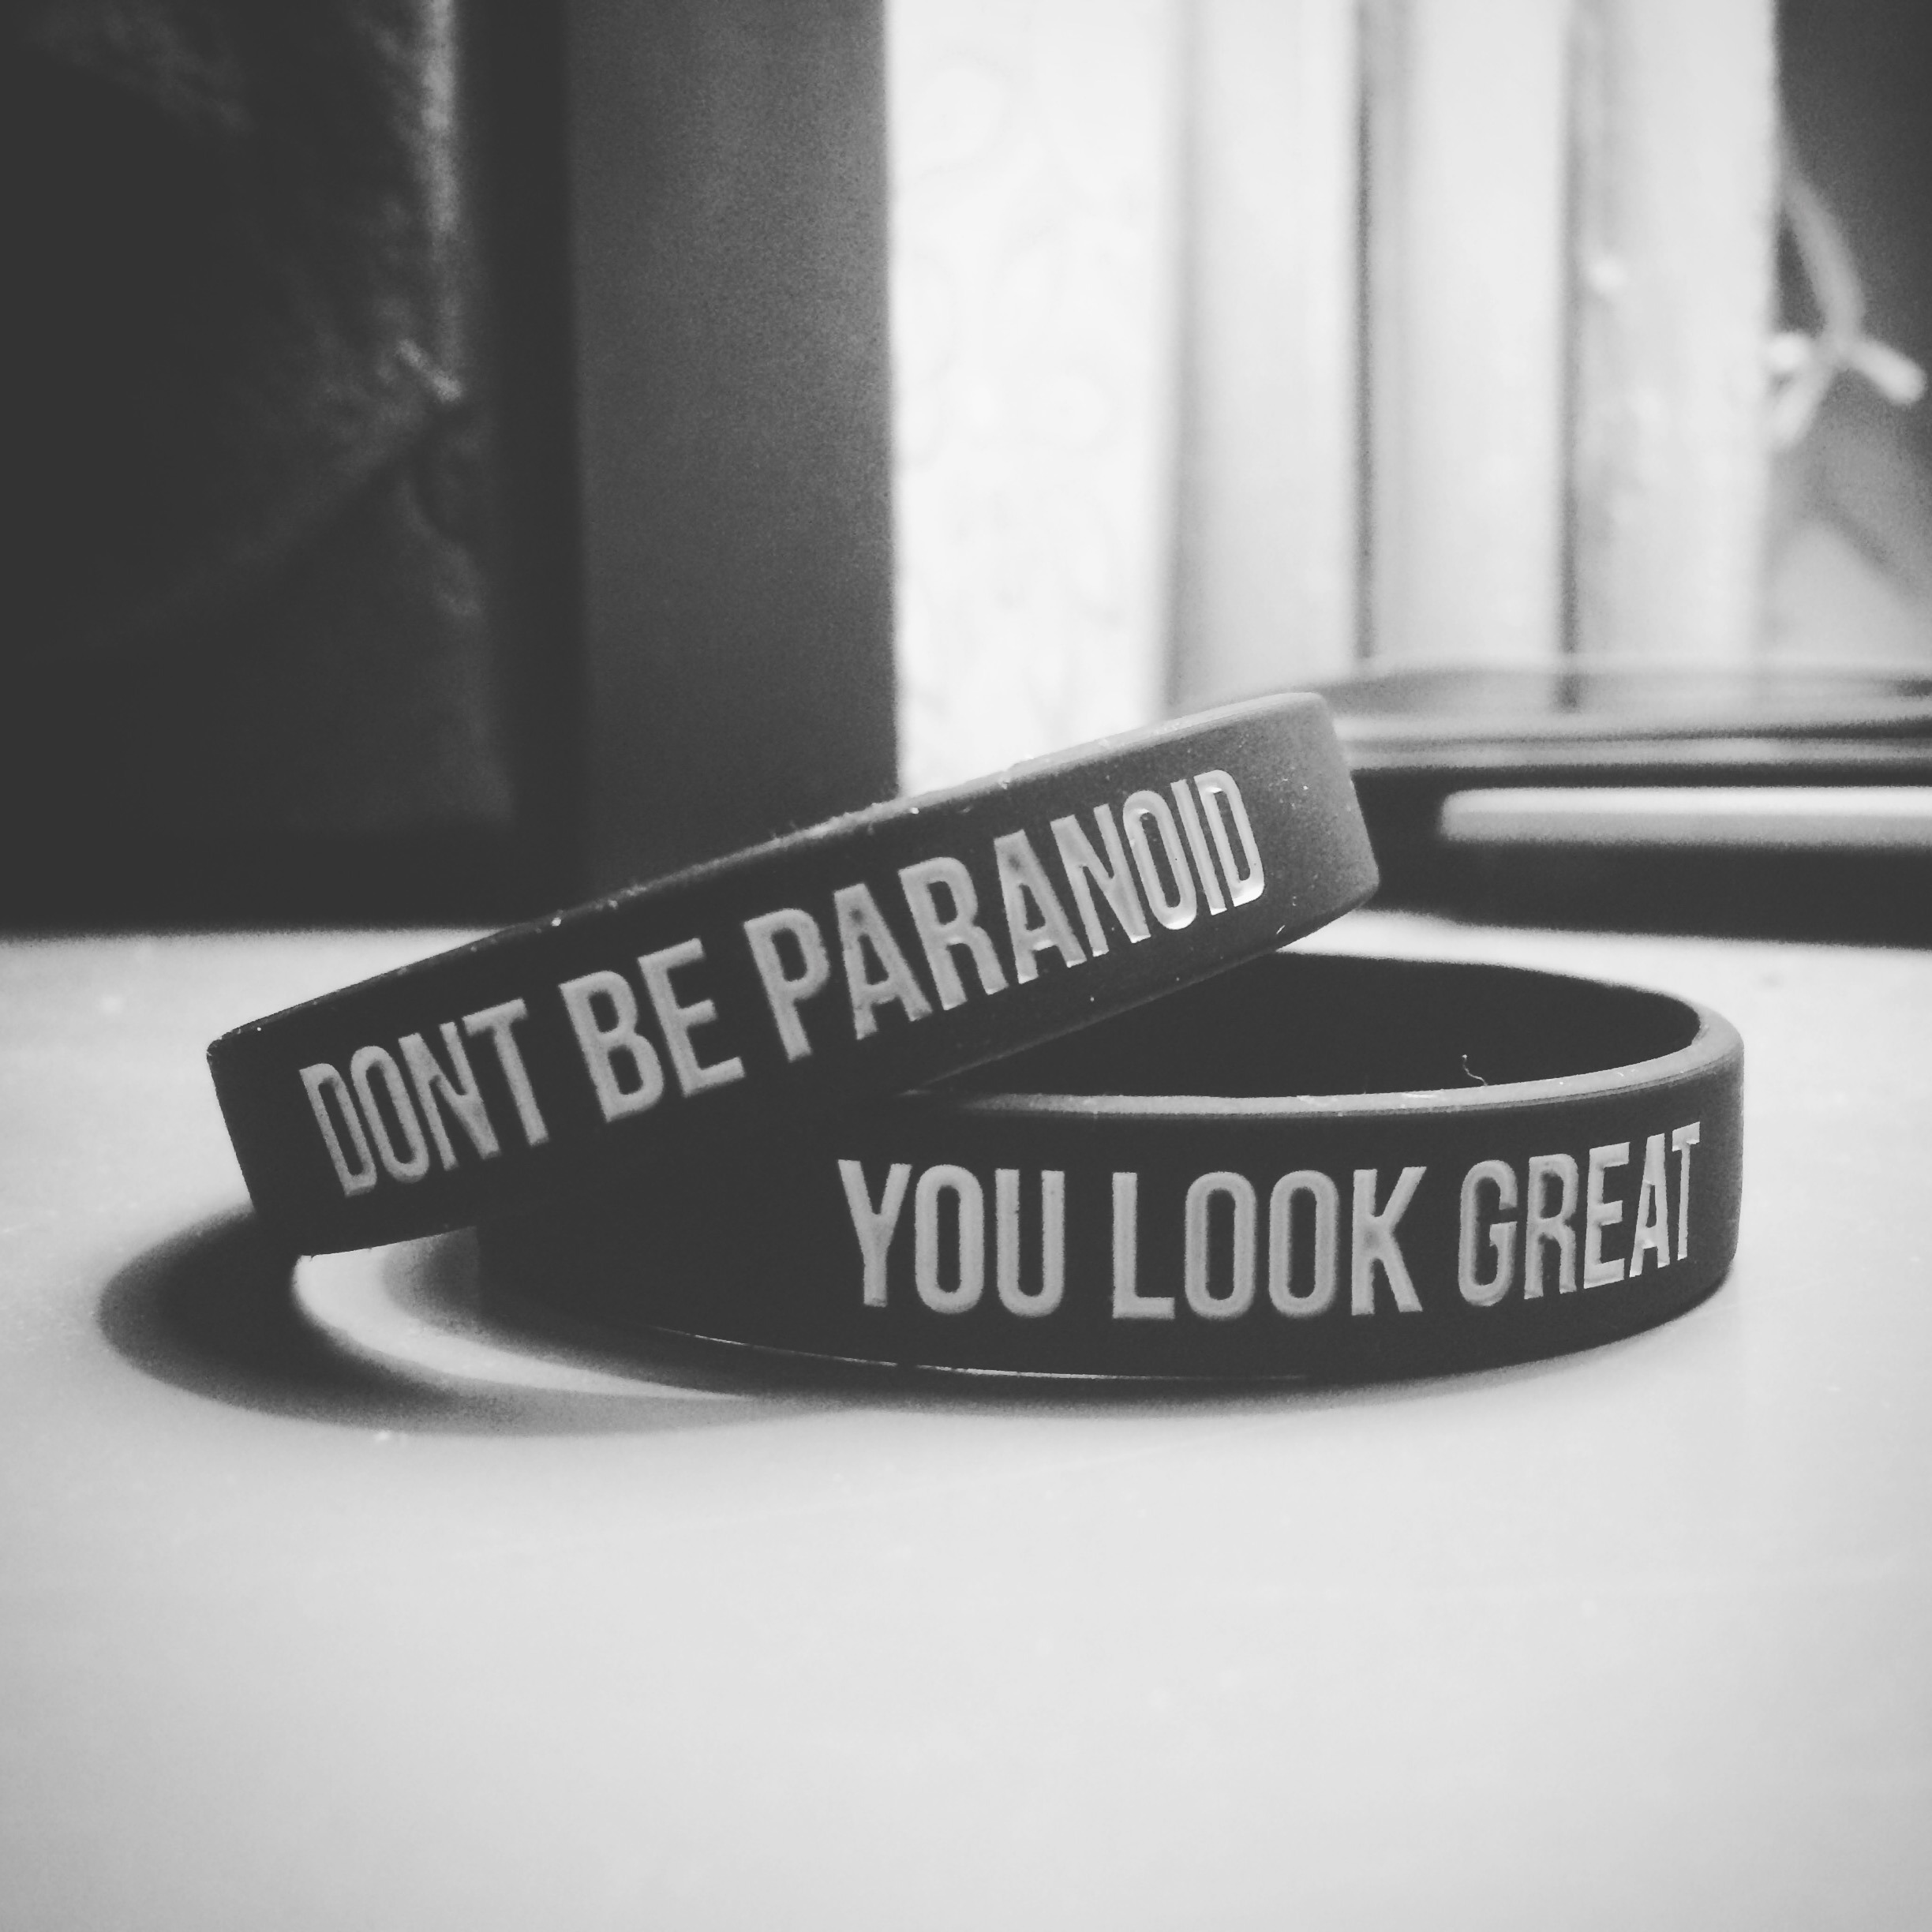 Dont be paranoid, you look great - bracelet